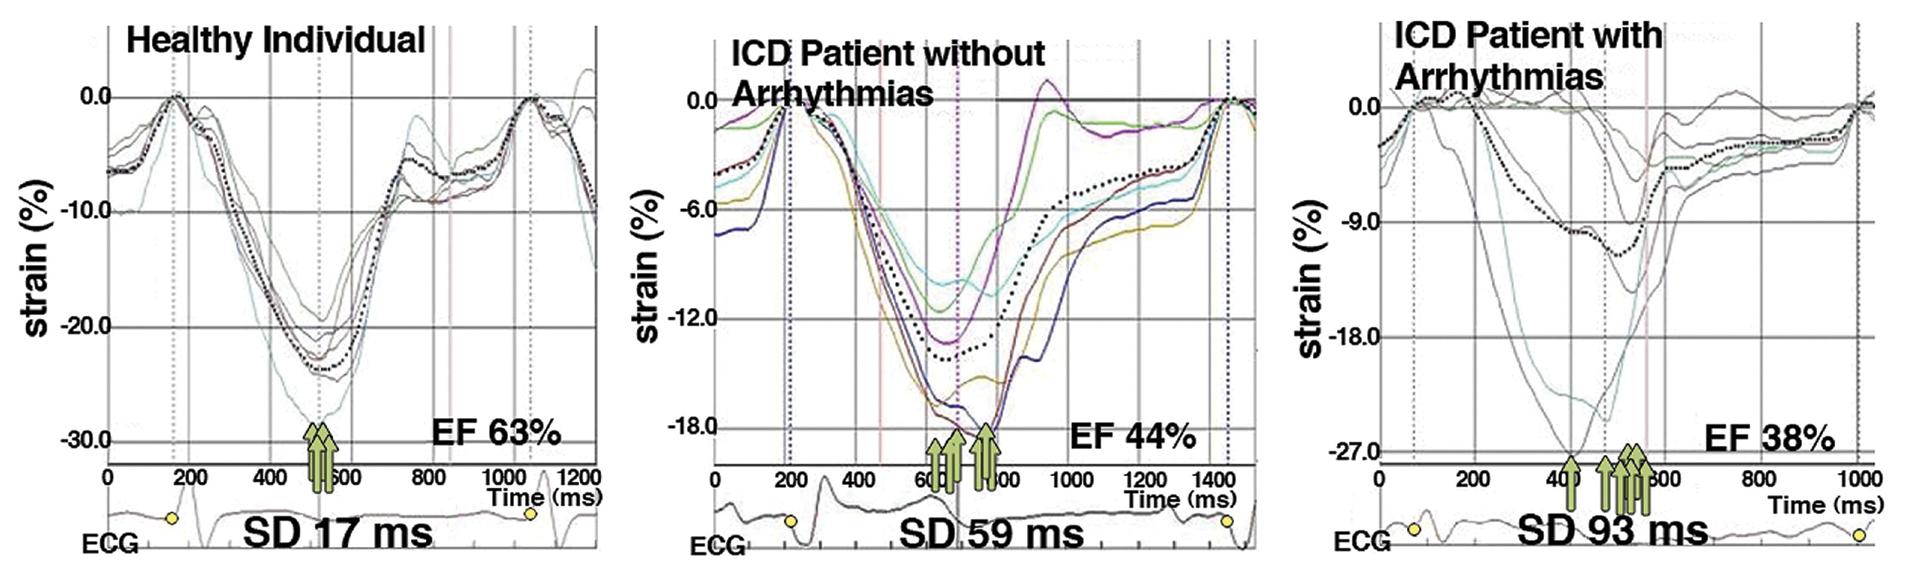 Fig. 5.3, Association of mechanical dispersion with arrhythmias. Strain echocardiograms in a healthy individual (upper left) and post–myocardial infarction patients with implantable defibrillators with (lower panel) and without (upper right) arrhythmias during follow-up. The timing of maximum myocardial shortening in each segment is shown by green arrows , and the average myocardial shortening for each patient is shown by the dotted line . EF , ejection fraction; ICD , implantable cardioverter defibrillator; SD , standard deviation.